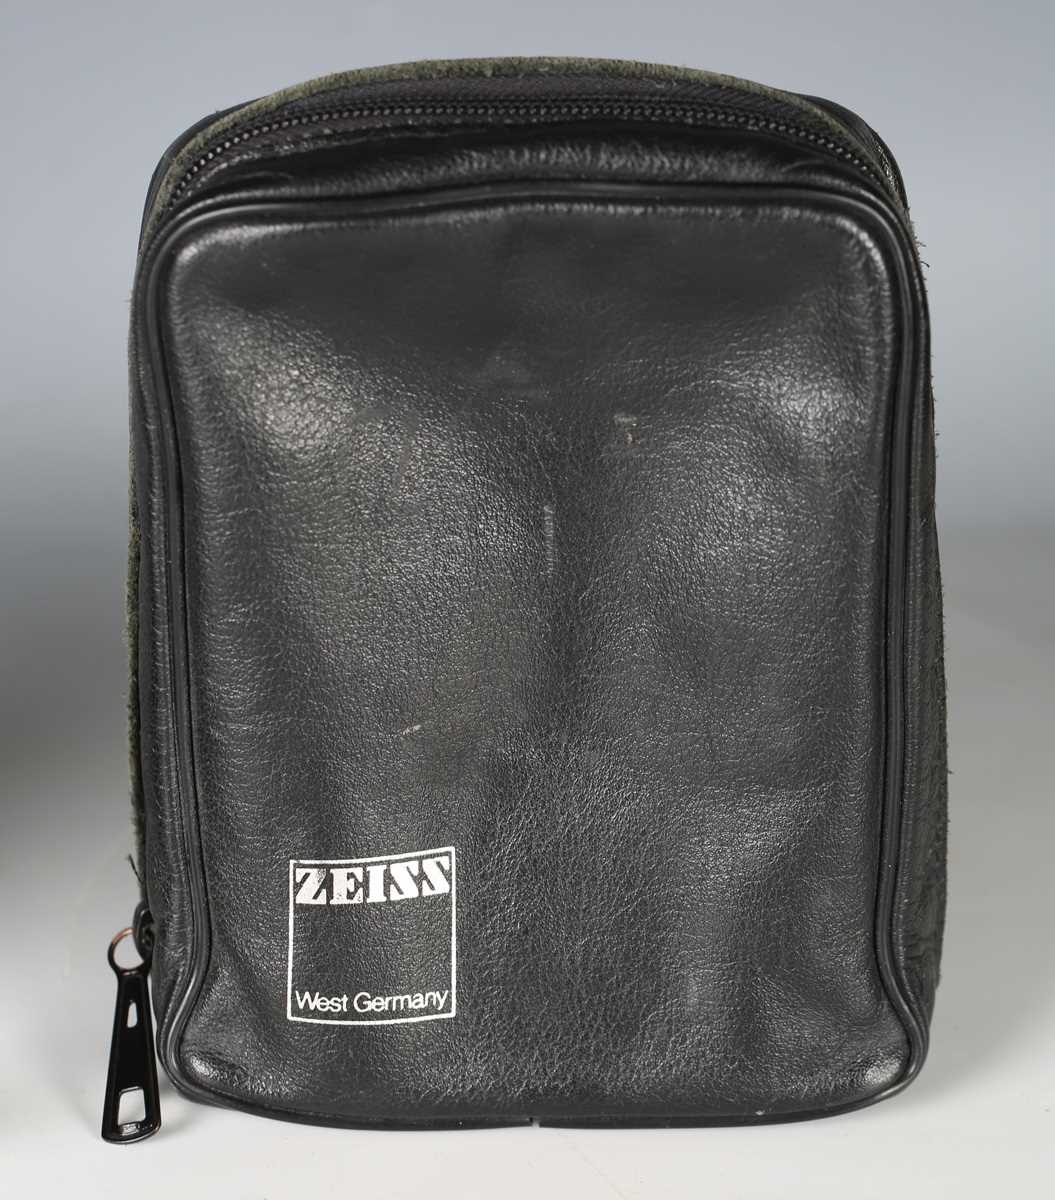 A pair of Zeiss 10 x 40 B binoculars, with outer rubber casing, cased. - Image 9 of 9